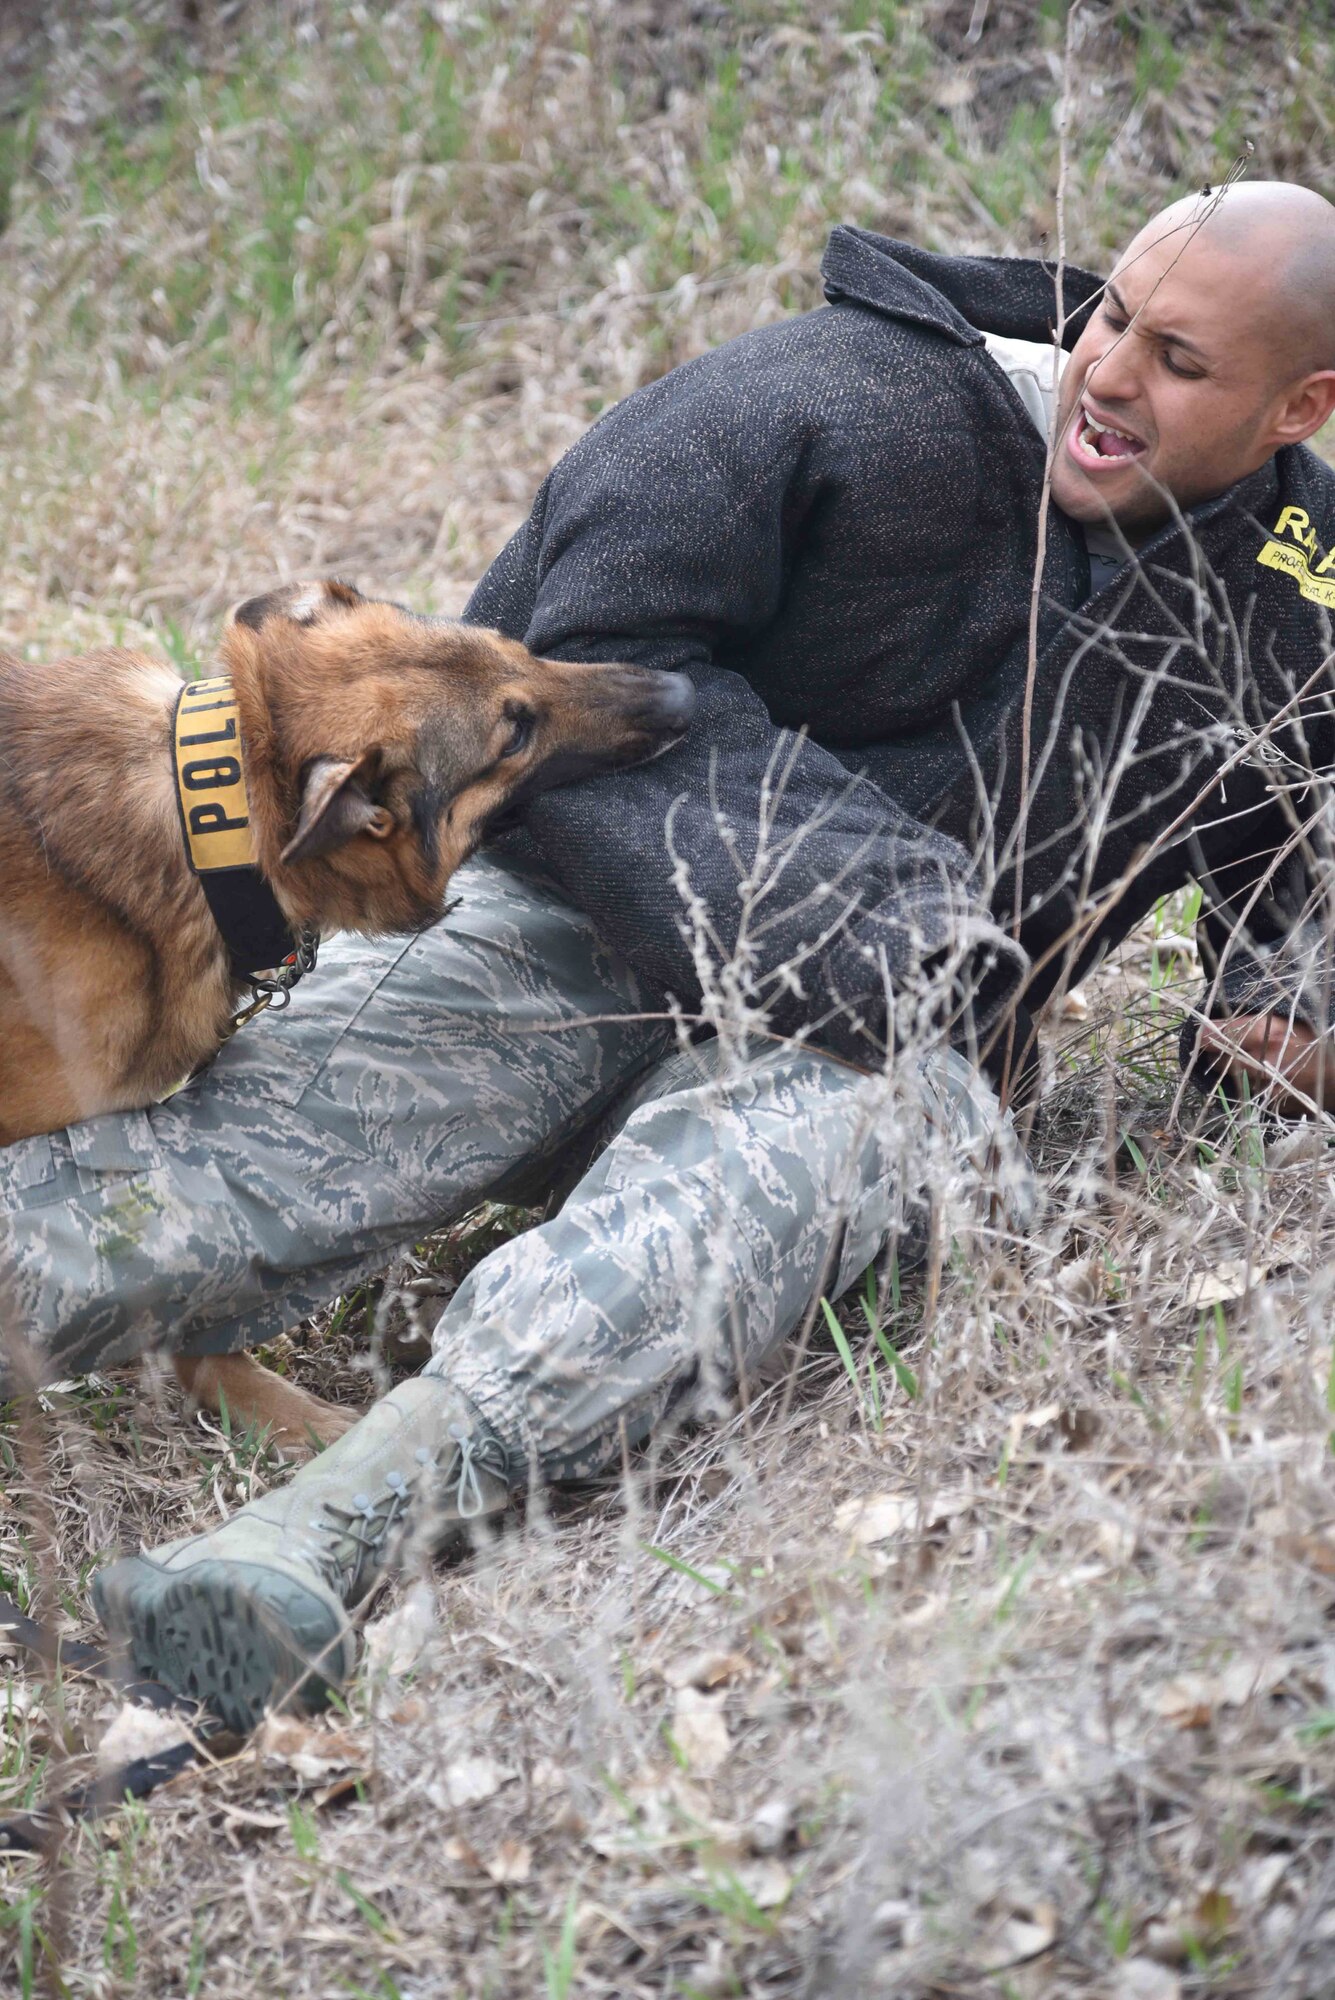 Staff Sgt. Elvin Jose, 22nd Security Forces Squadron military working dog handler, is bitten by Iras, an MWD, during a scout training session March 23, 2017, at McConnell Air Force Base, Kan. Jose wore a bite suit to protect himself from being injured. (U.S. Air Force photo/Airman 1st Class Erin McClellan)